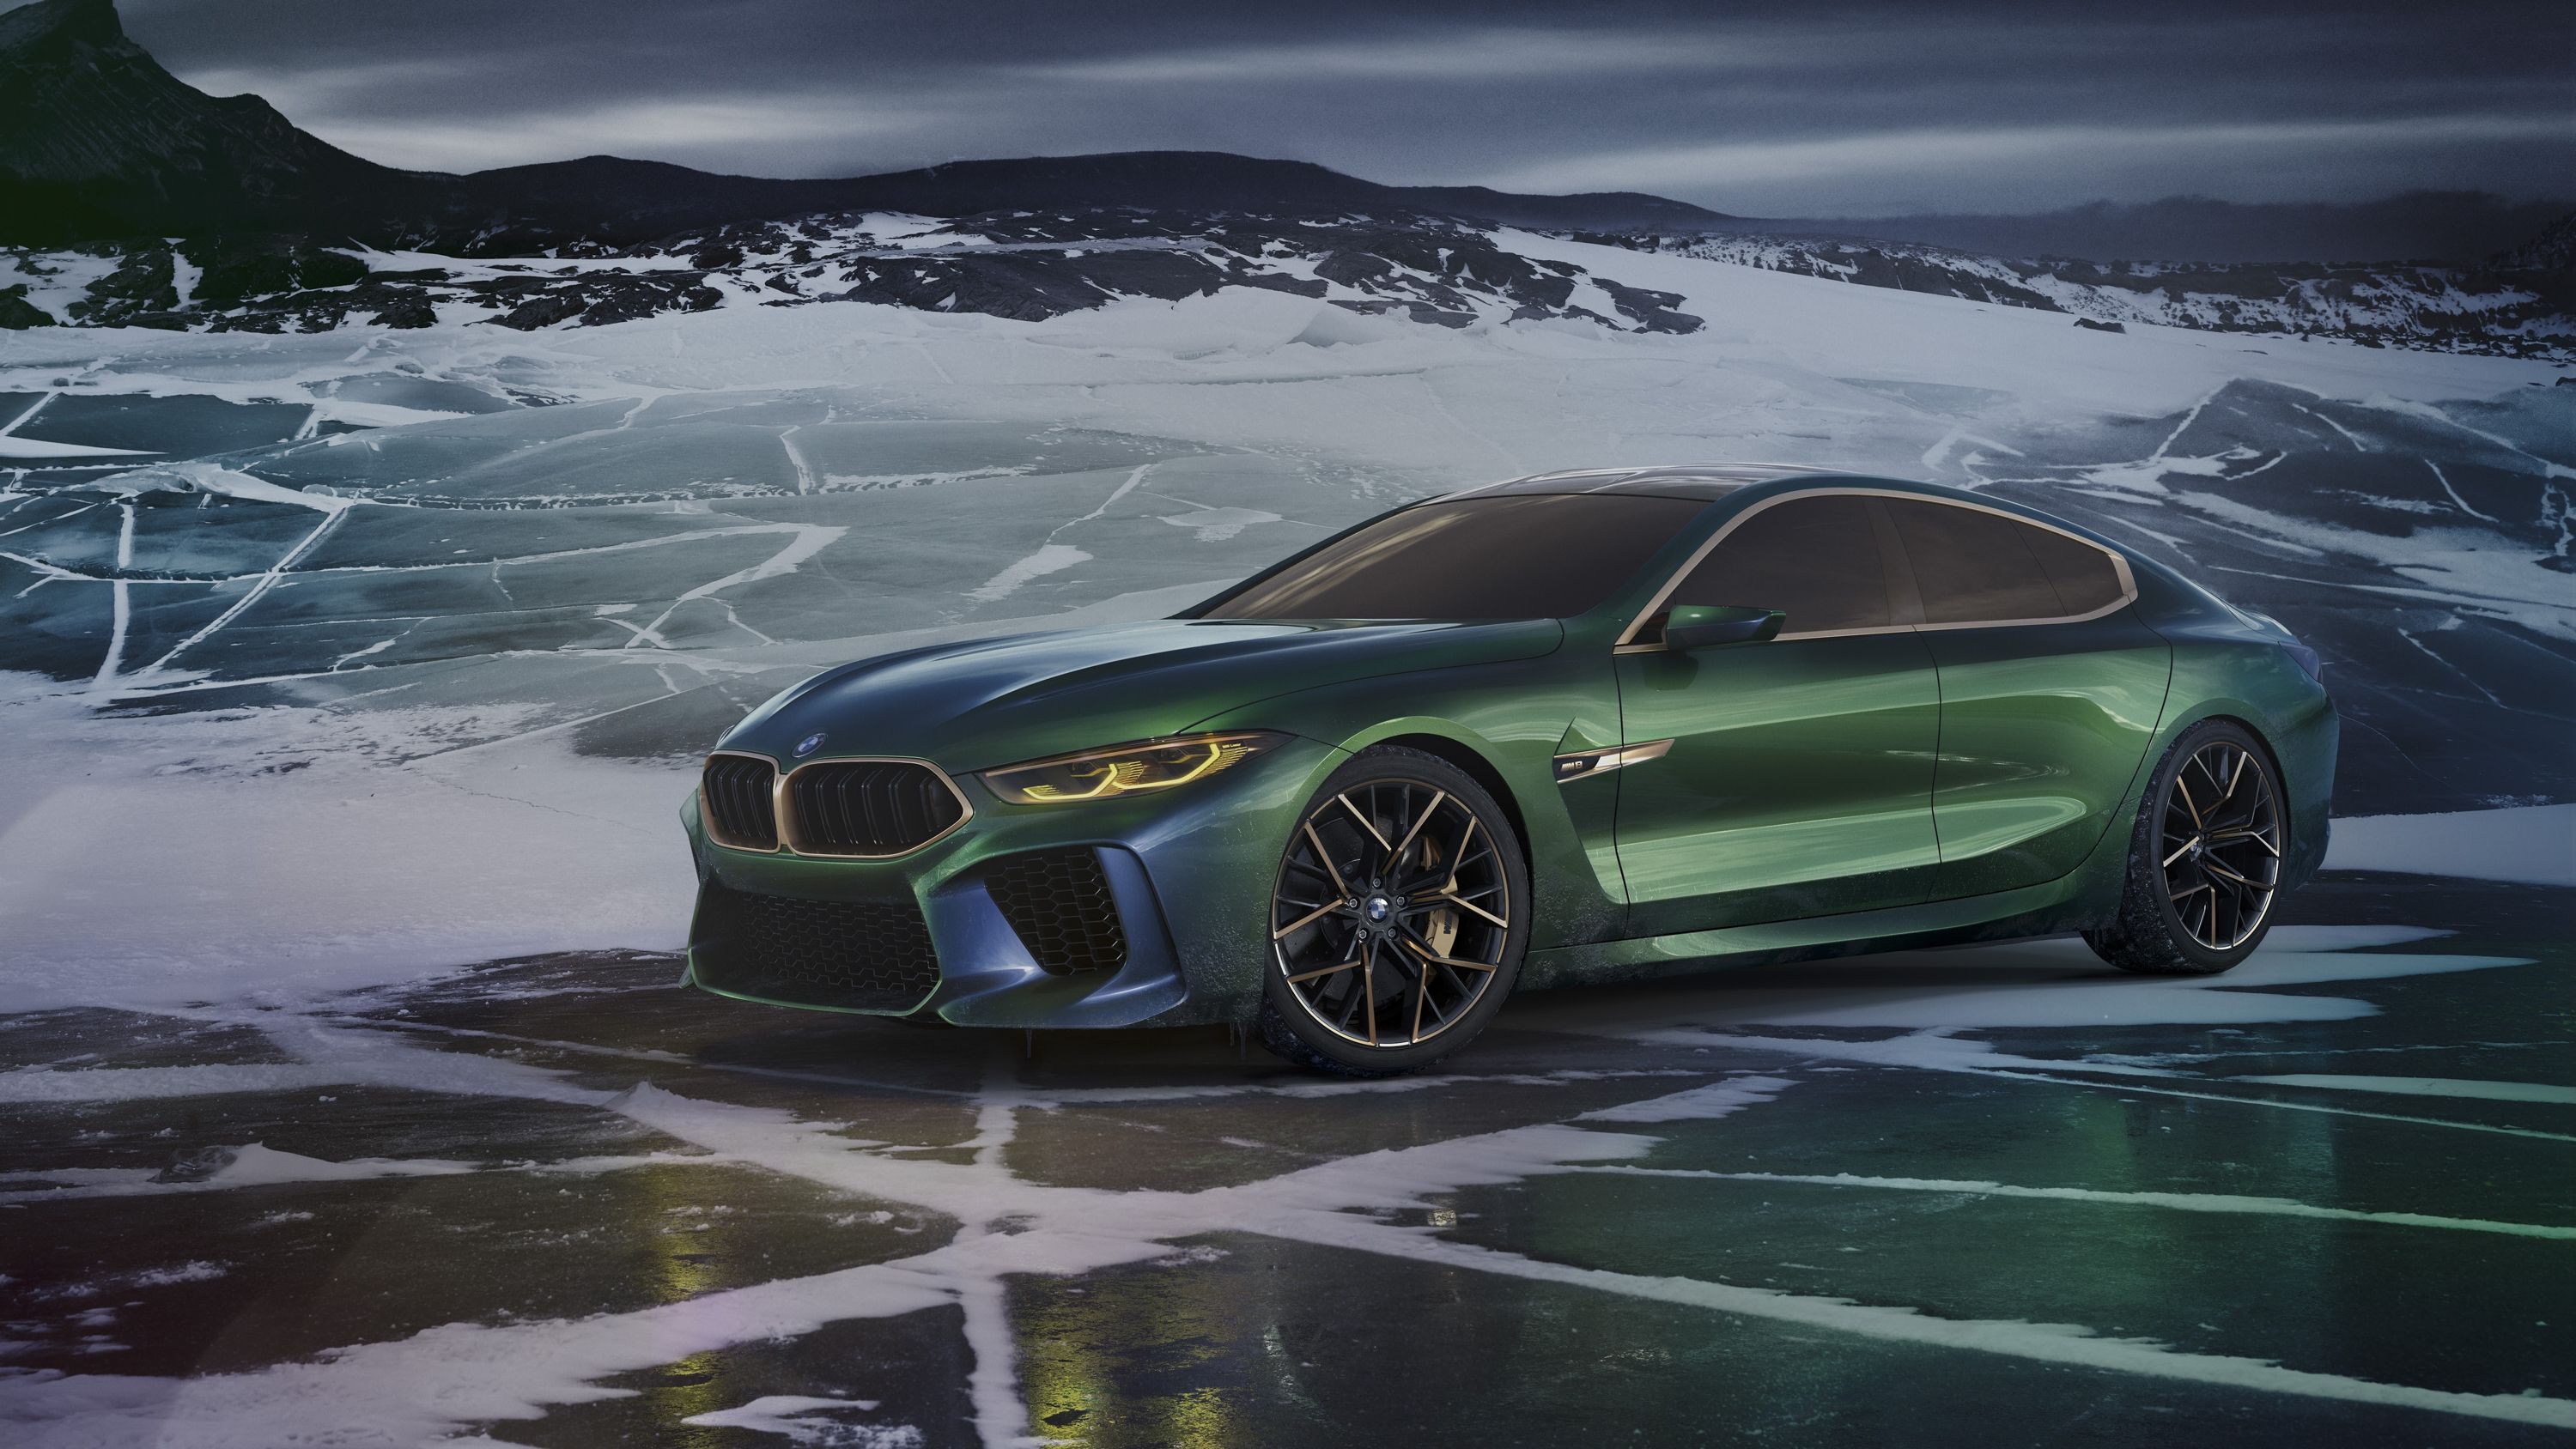 2018 BMW Continues to Drag its Feet by Displaying the M8 Gran Coupe Concept Instead of the Production 8 Series